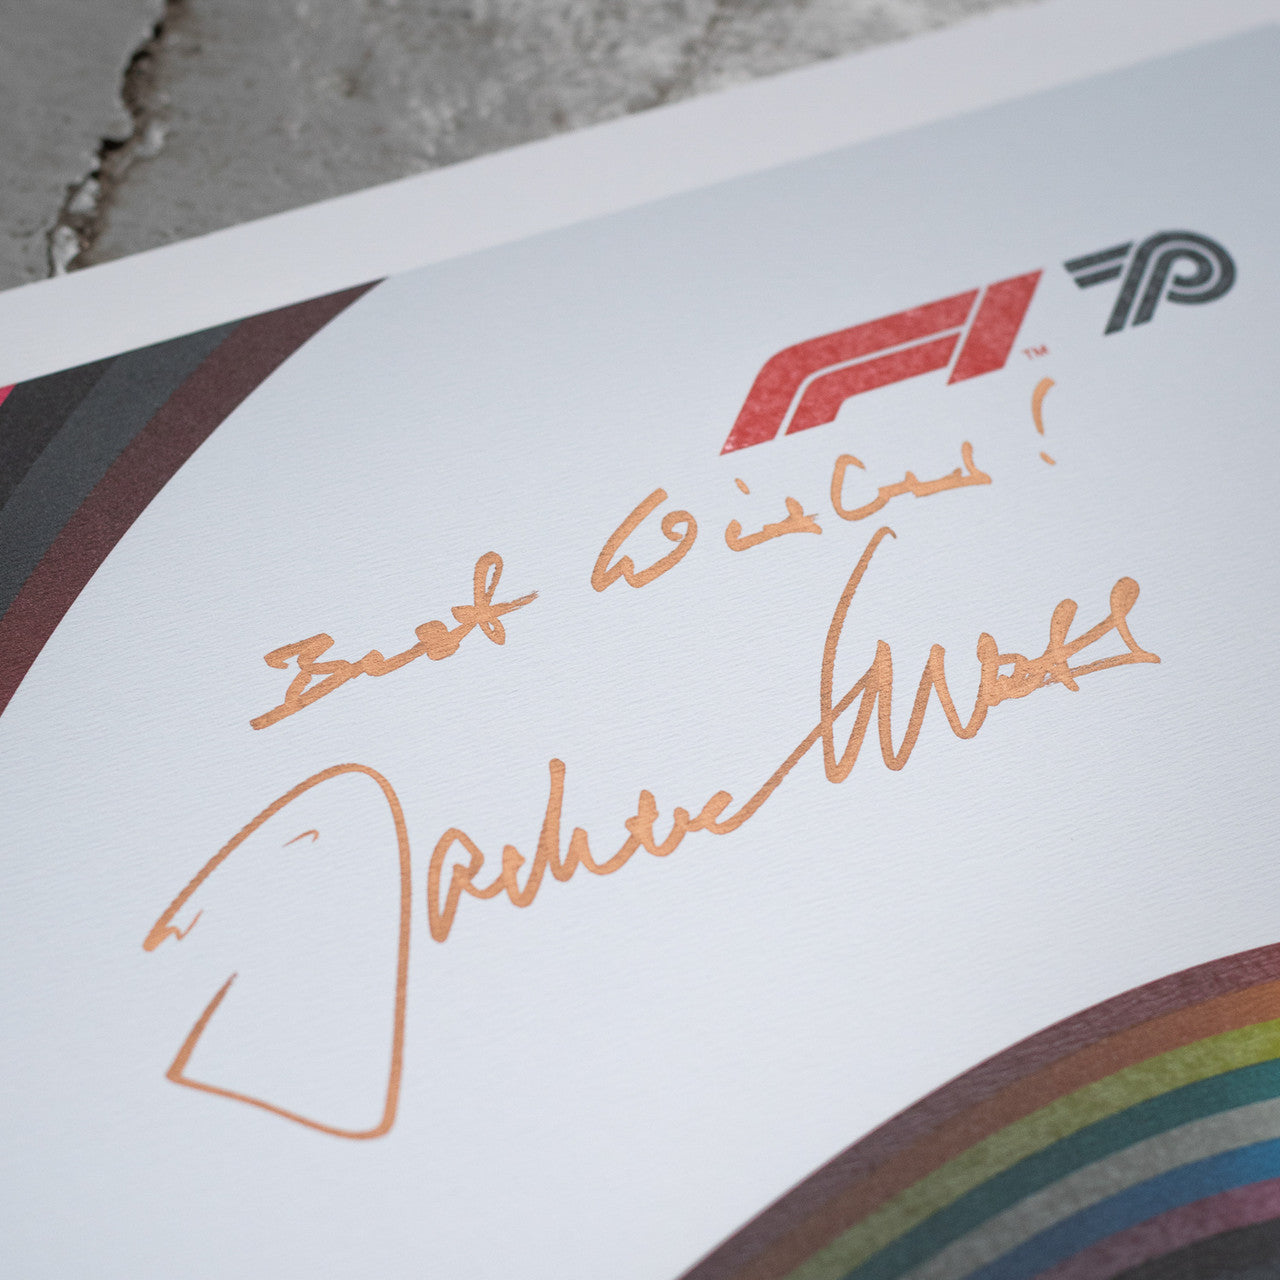 Signed by Jochen Mass - We Race As One | Limited Edition